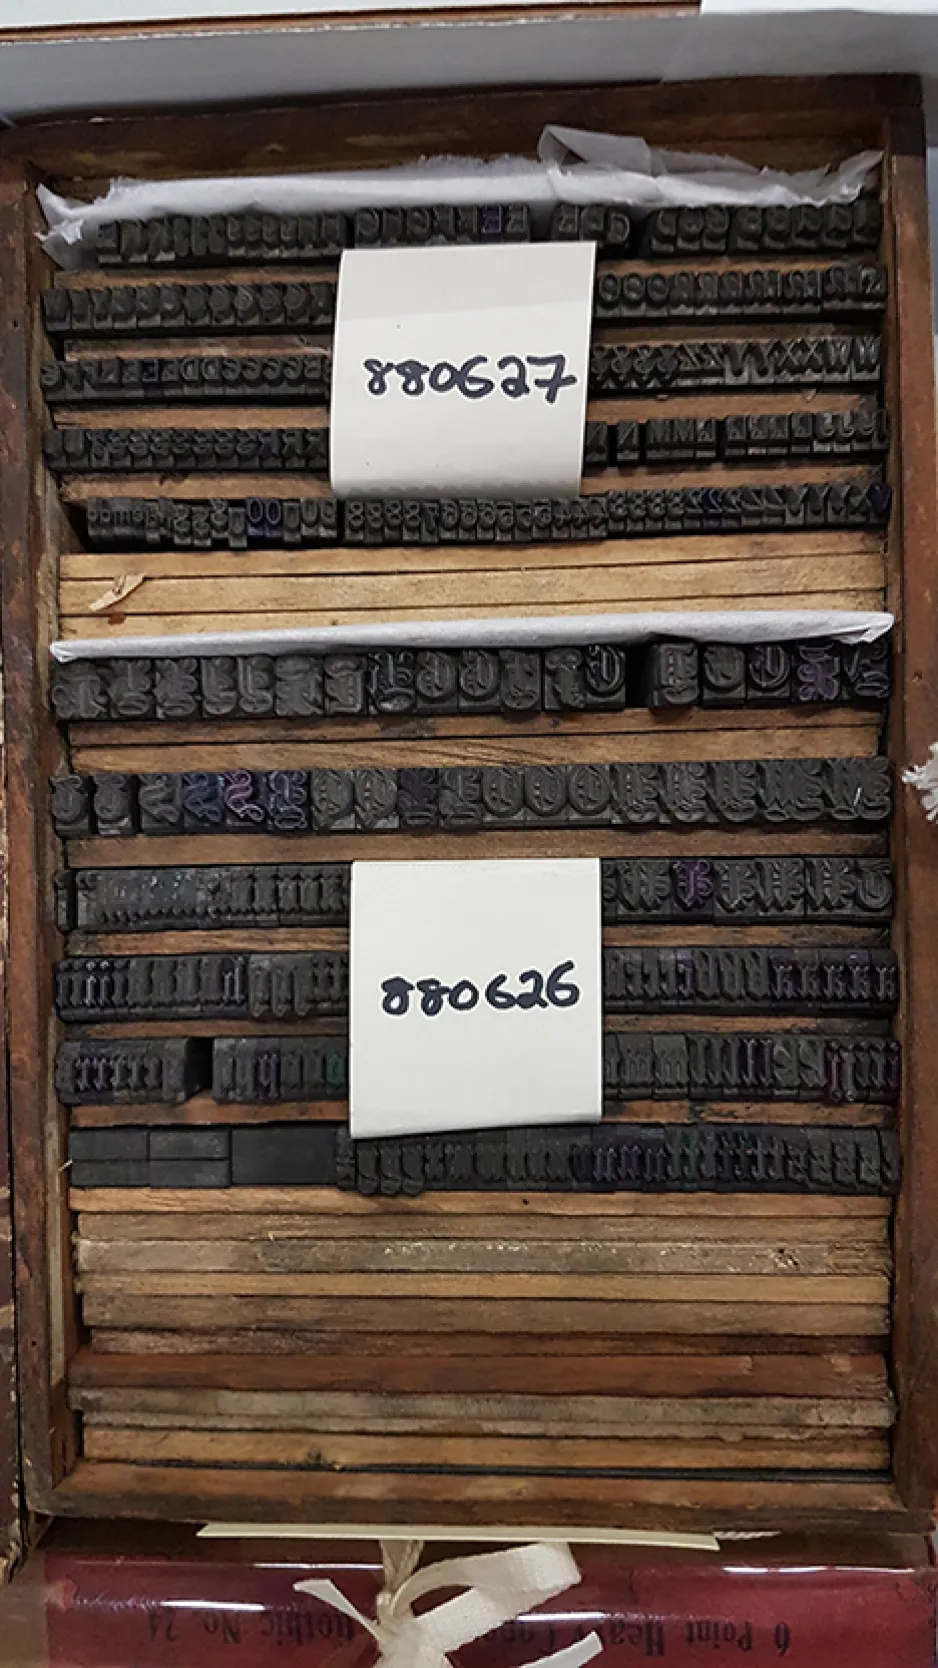 Two artifacts are housed in a wooden box. They are made up of foundry type that are organized alphabetically right to left. The first artifact is labeled with a white tag with black writing that says “880627.” The artifact is an 18-point ornate gothic typeface with serifs on the characters. The second artifact is labeled with a white tag with black writing that says “880626.” It is a 24-point Black script with very ornate characters.